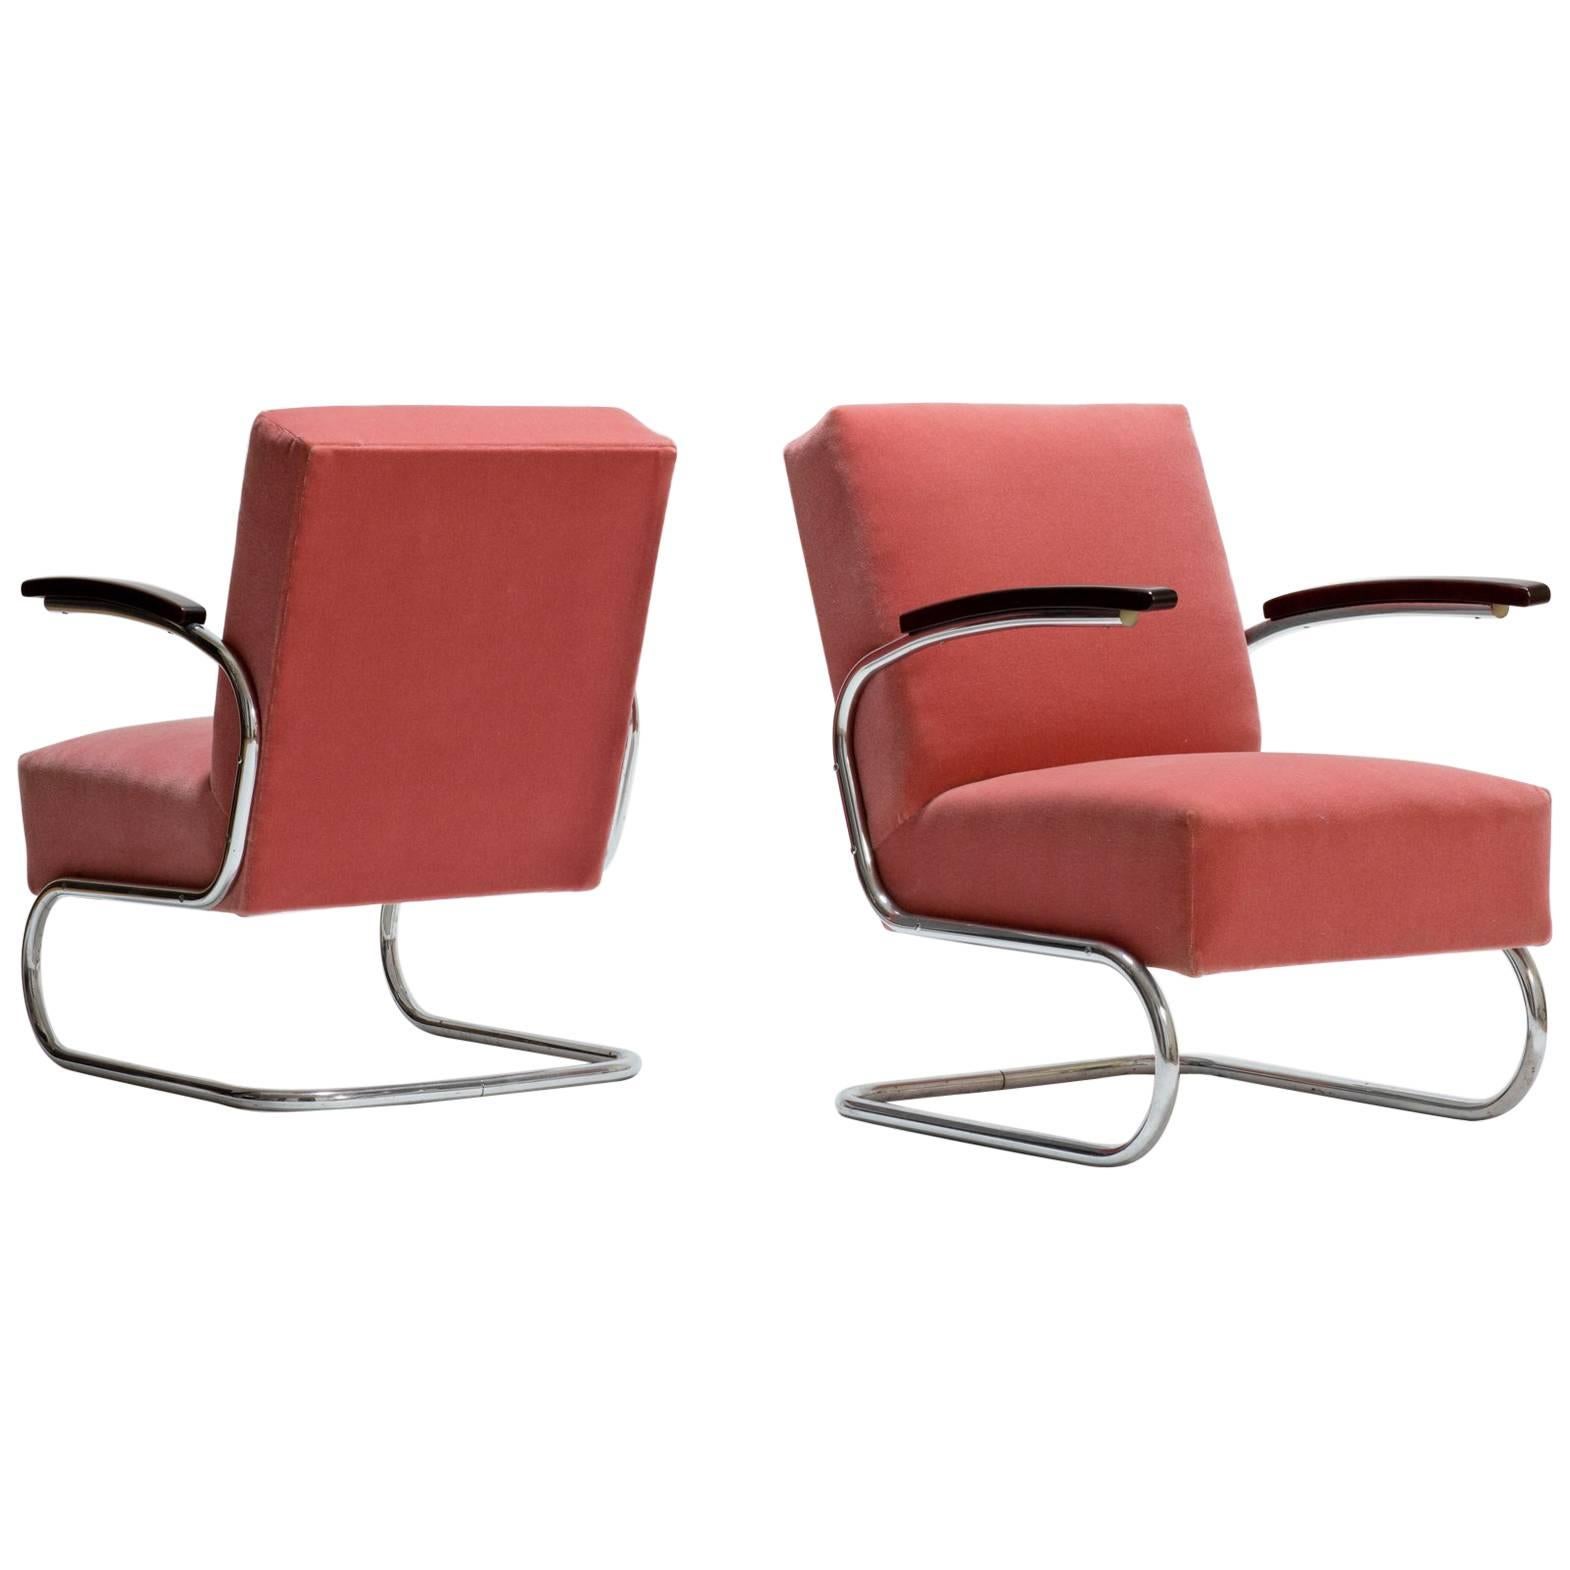 Pair of Cantilever Tubular Steel Armchairs by M�ücke Melde with Mohair Upholstery For Sale